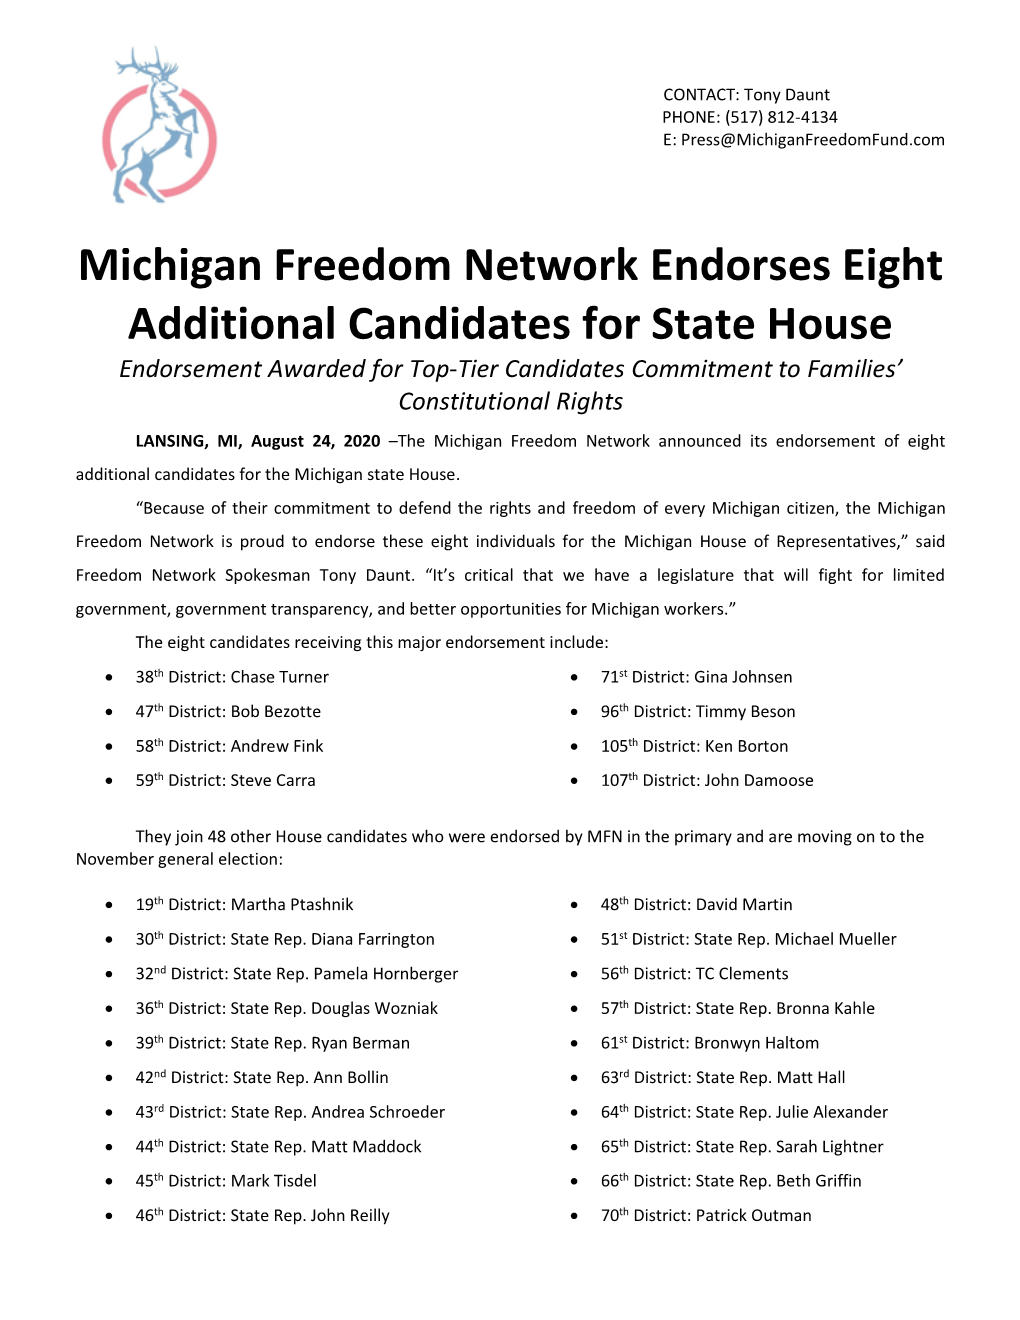 Michigan Freedom Network Endorses Eight Additional Candidates For